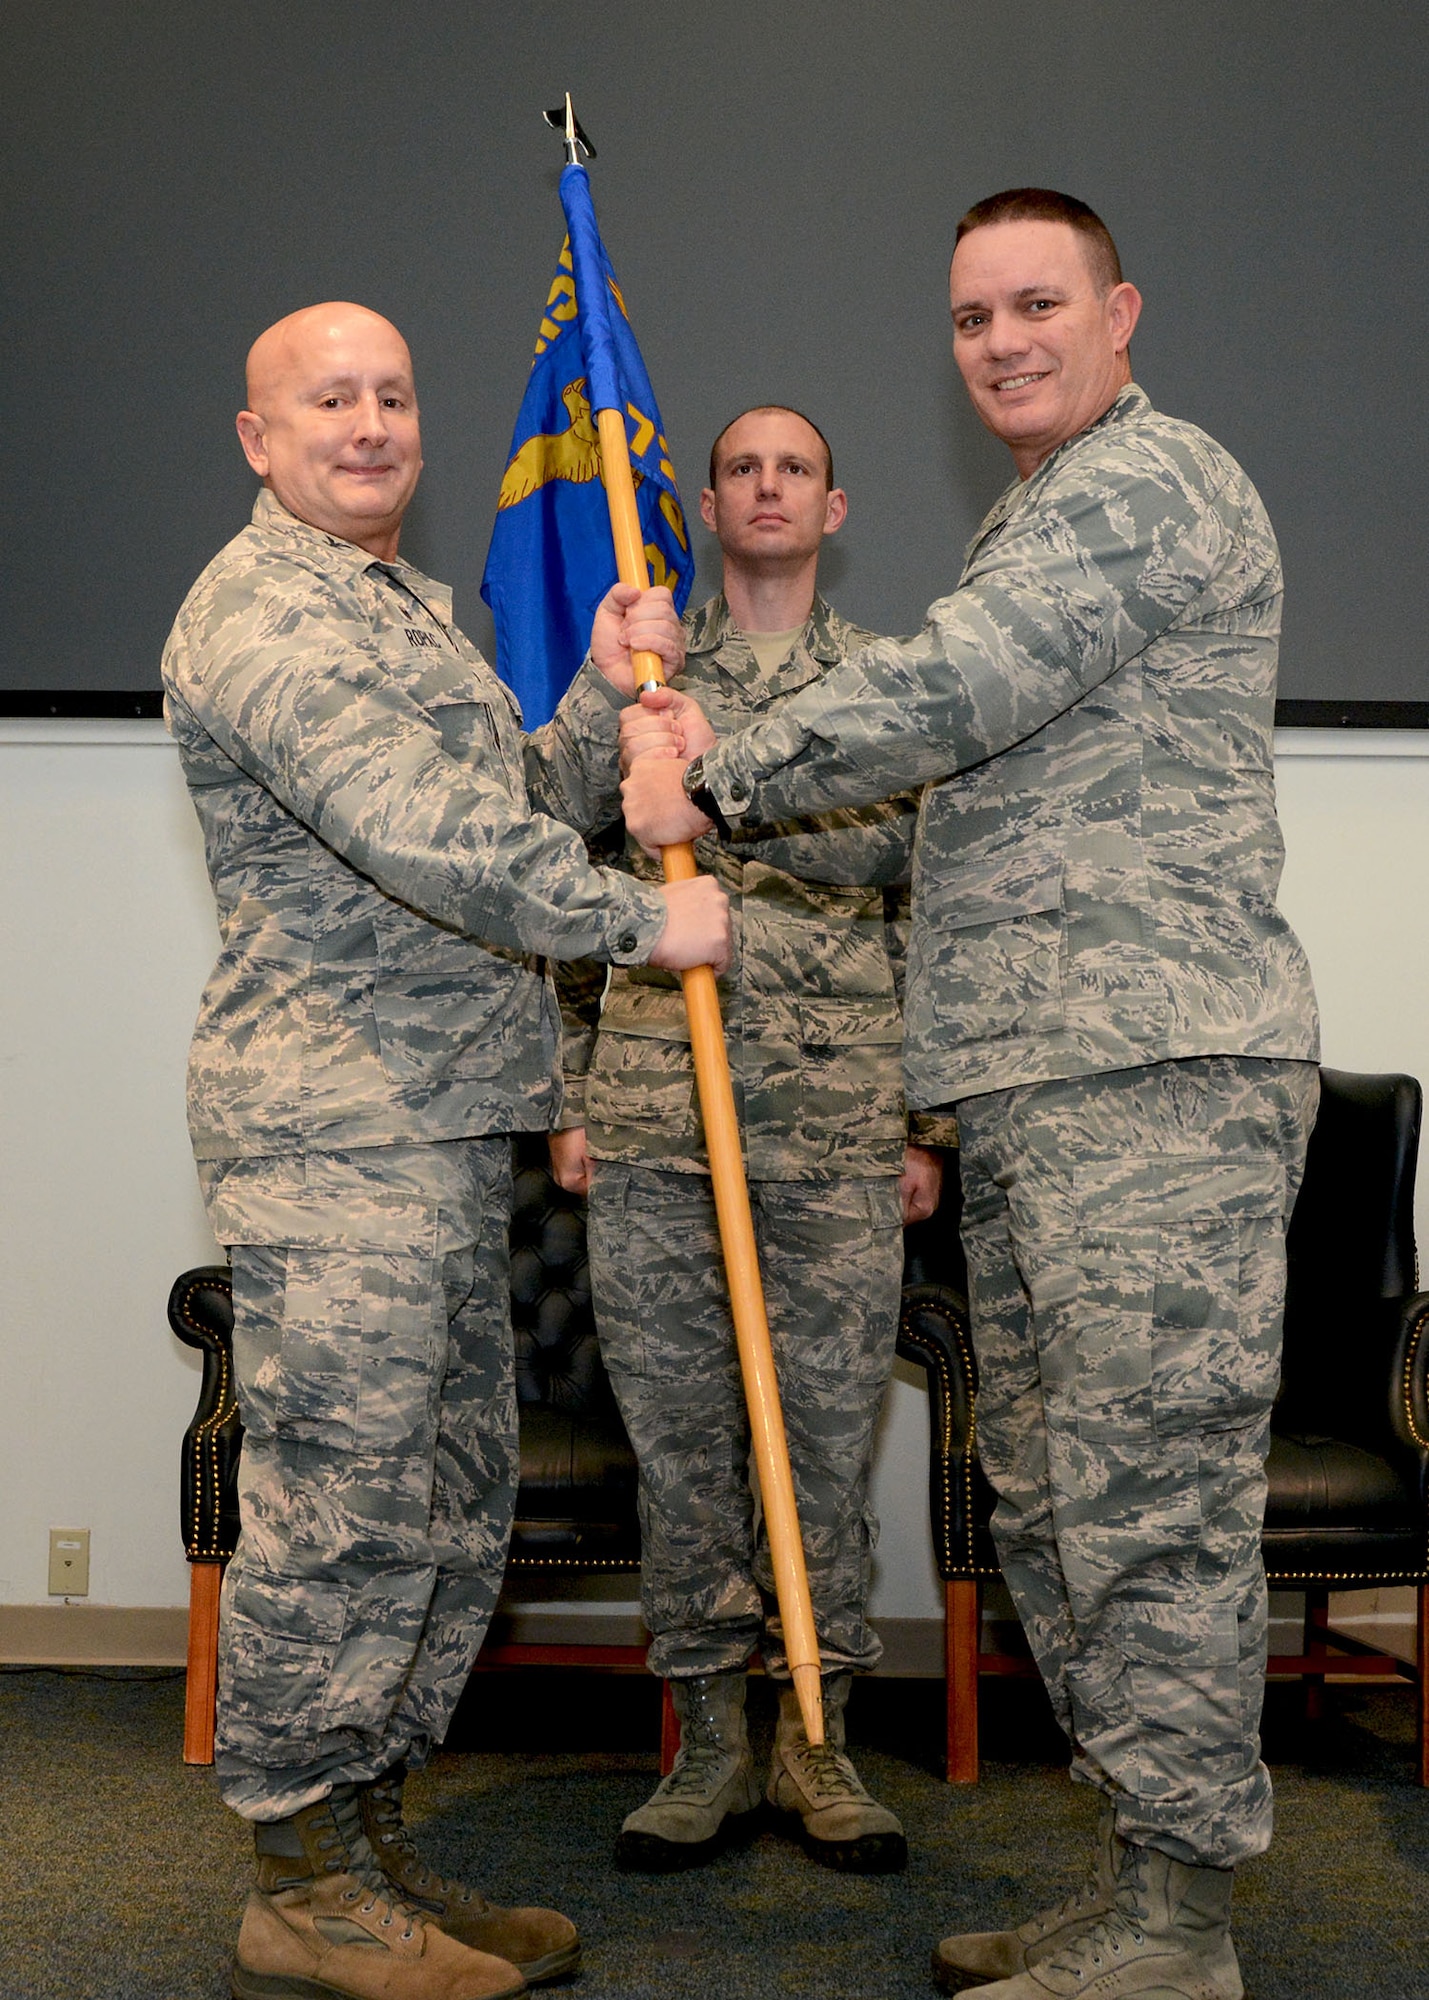 Lt. Col. William Young, right, relinquishes command of the 72nd Aerial Port Squadron Feb. 10, 2019, at Tinker Air Force Base, Oklahoma to Col. Richard Ropac, 507th Mission Support Group commander, who passed the guidon to Col. Darryl McLean moments later. (U.S. Air Force photo by Tech. Sgt. Samantha Mathison)